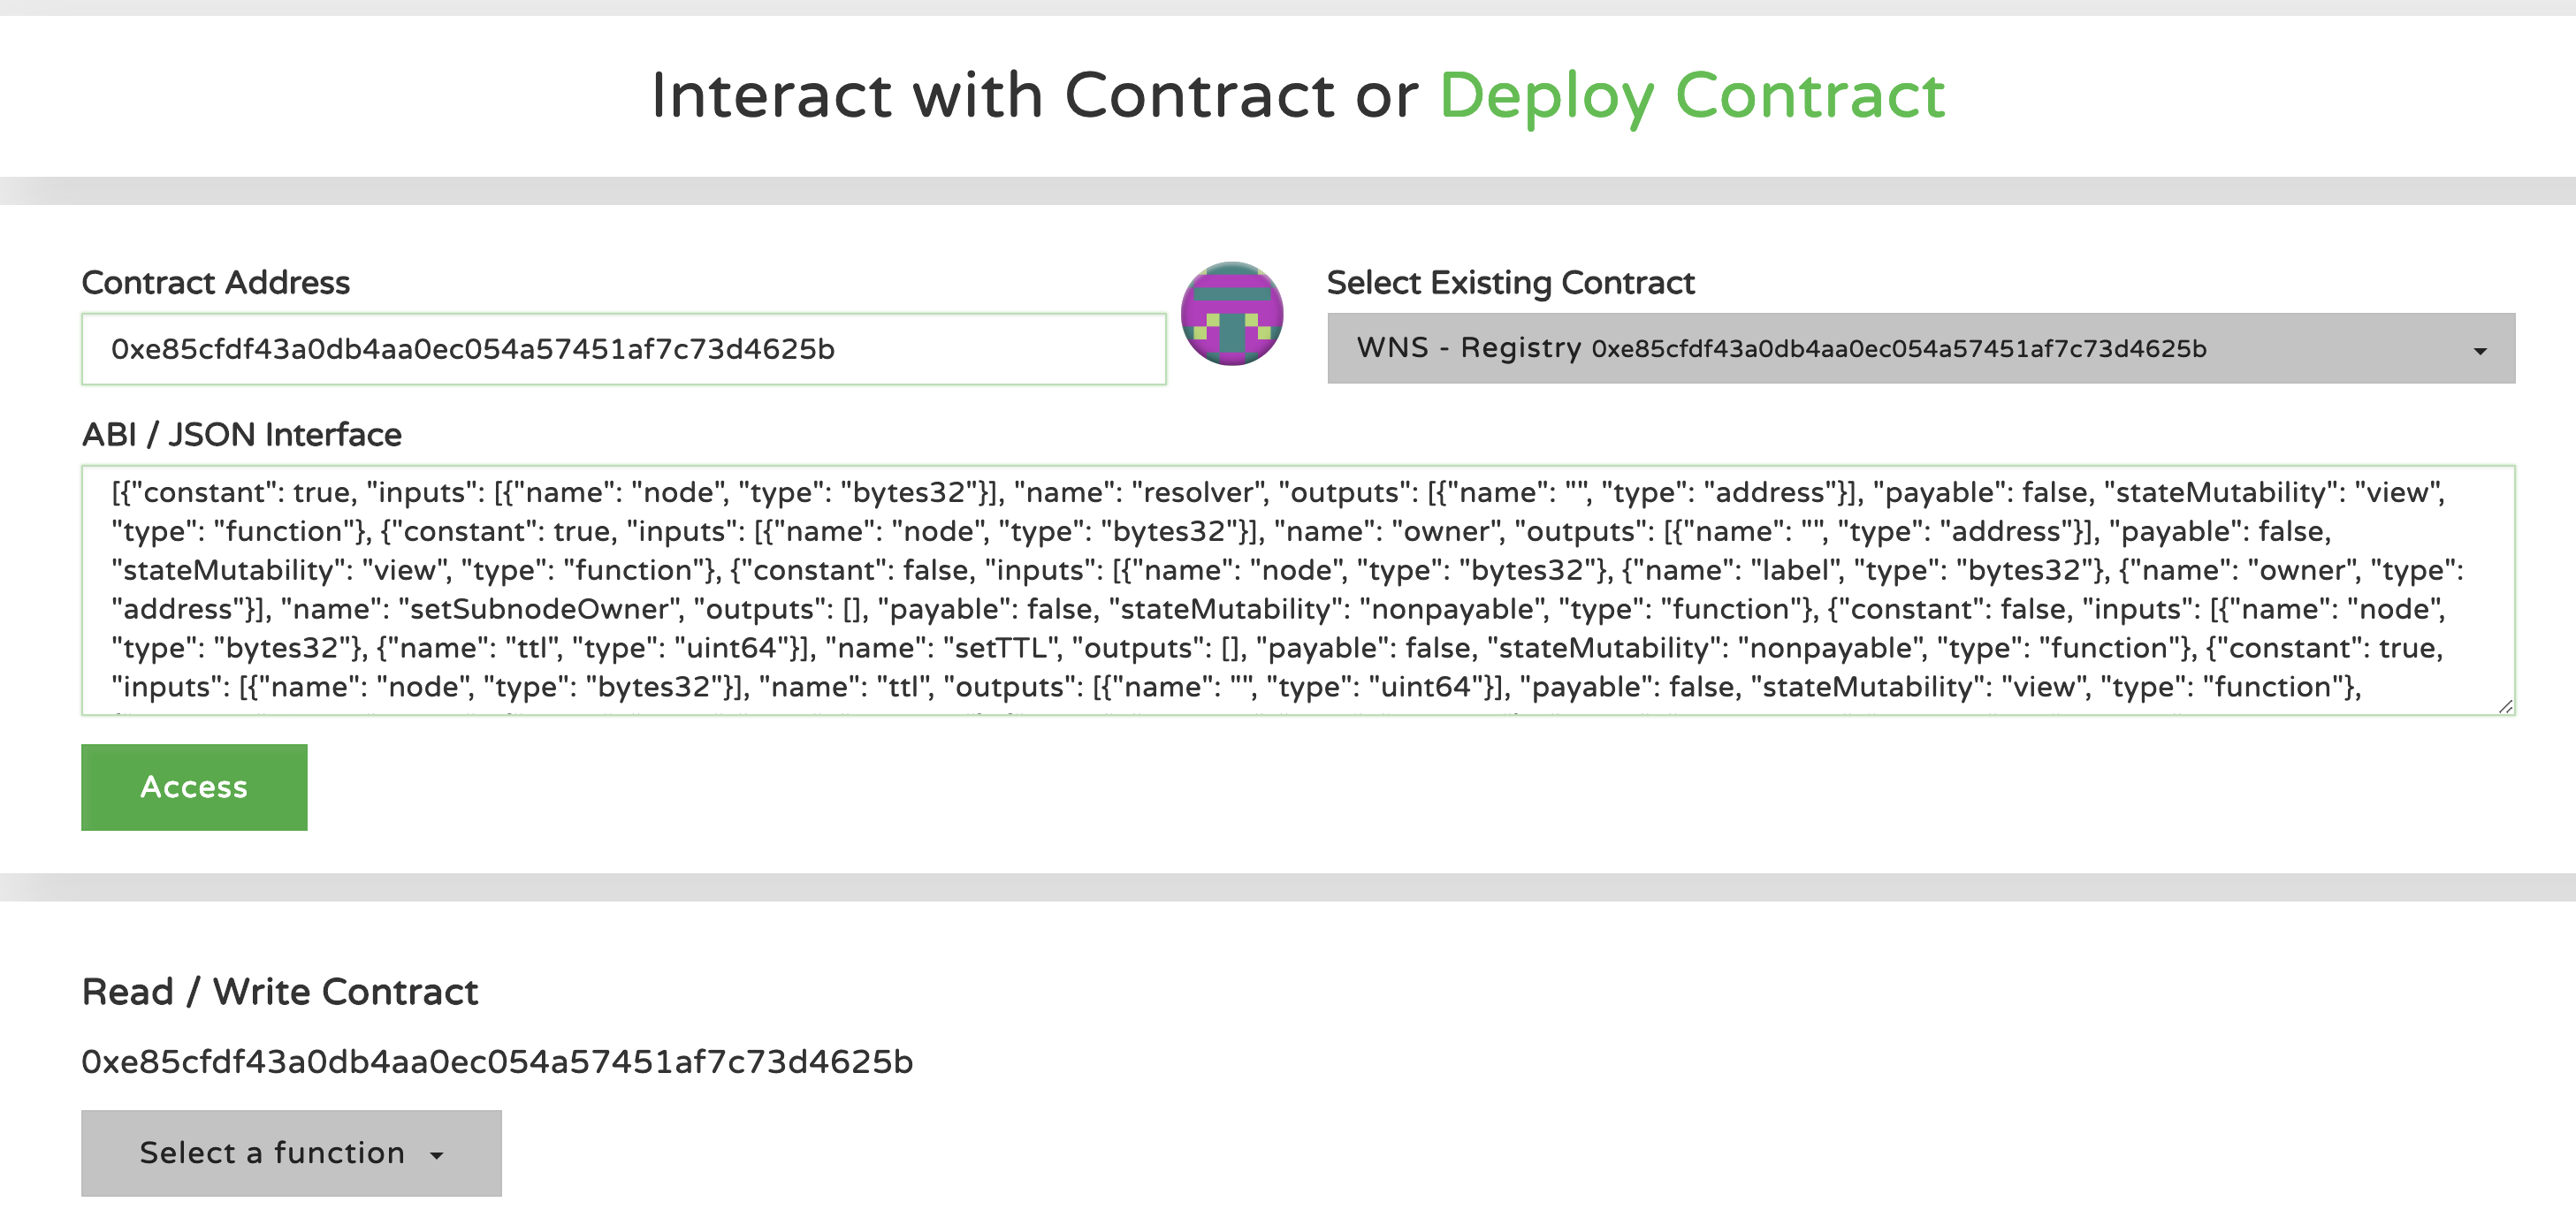 Access contract